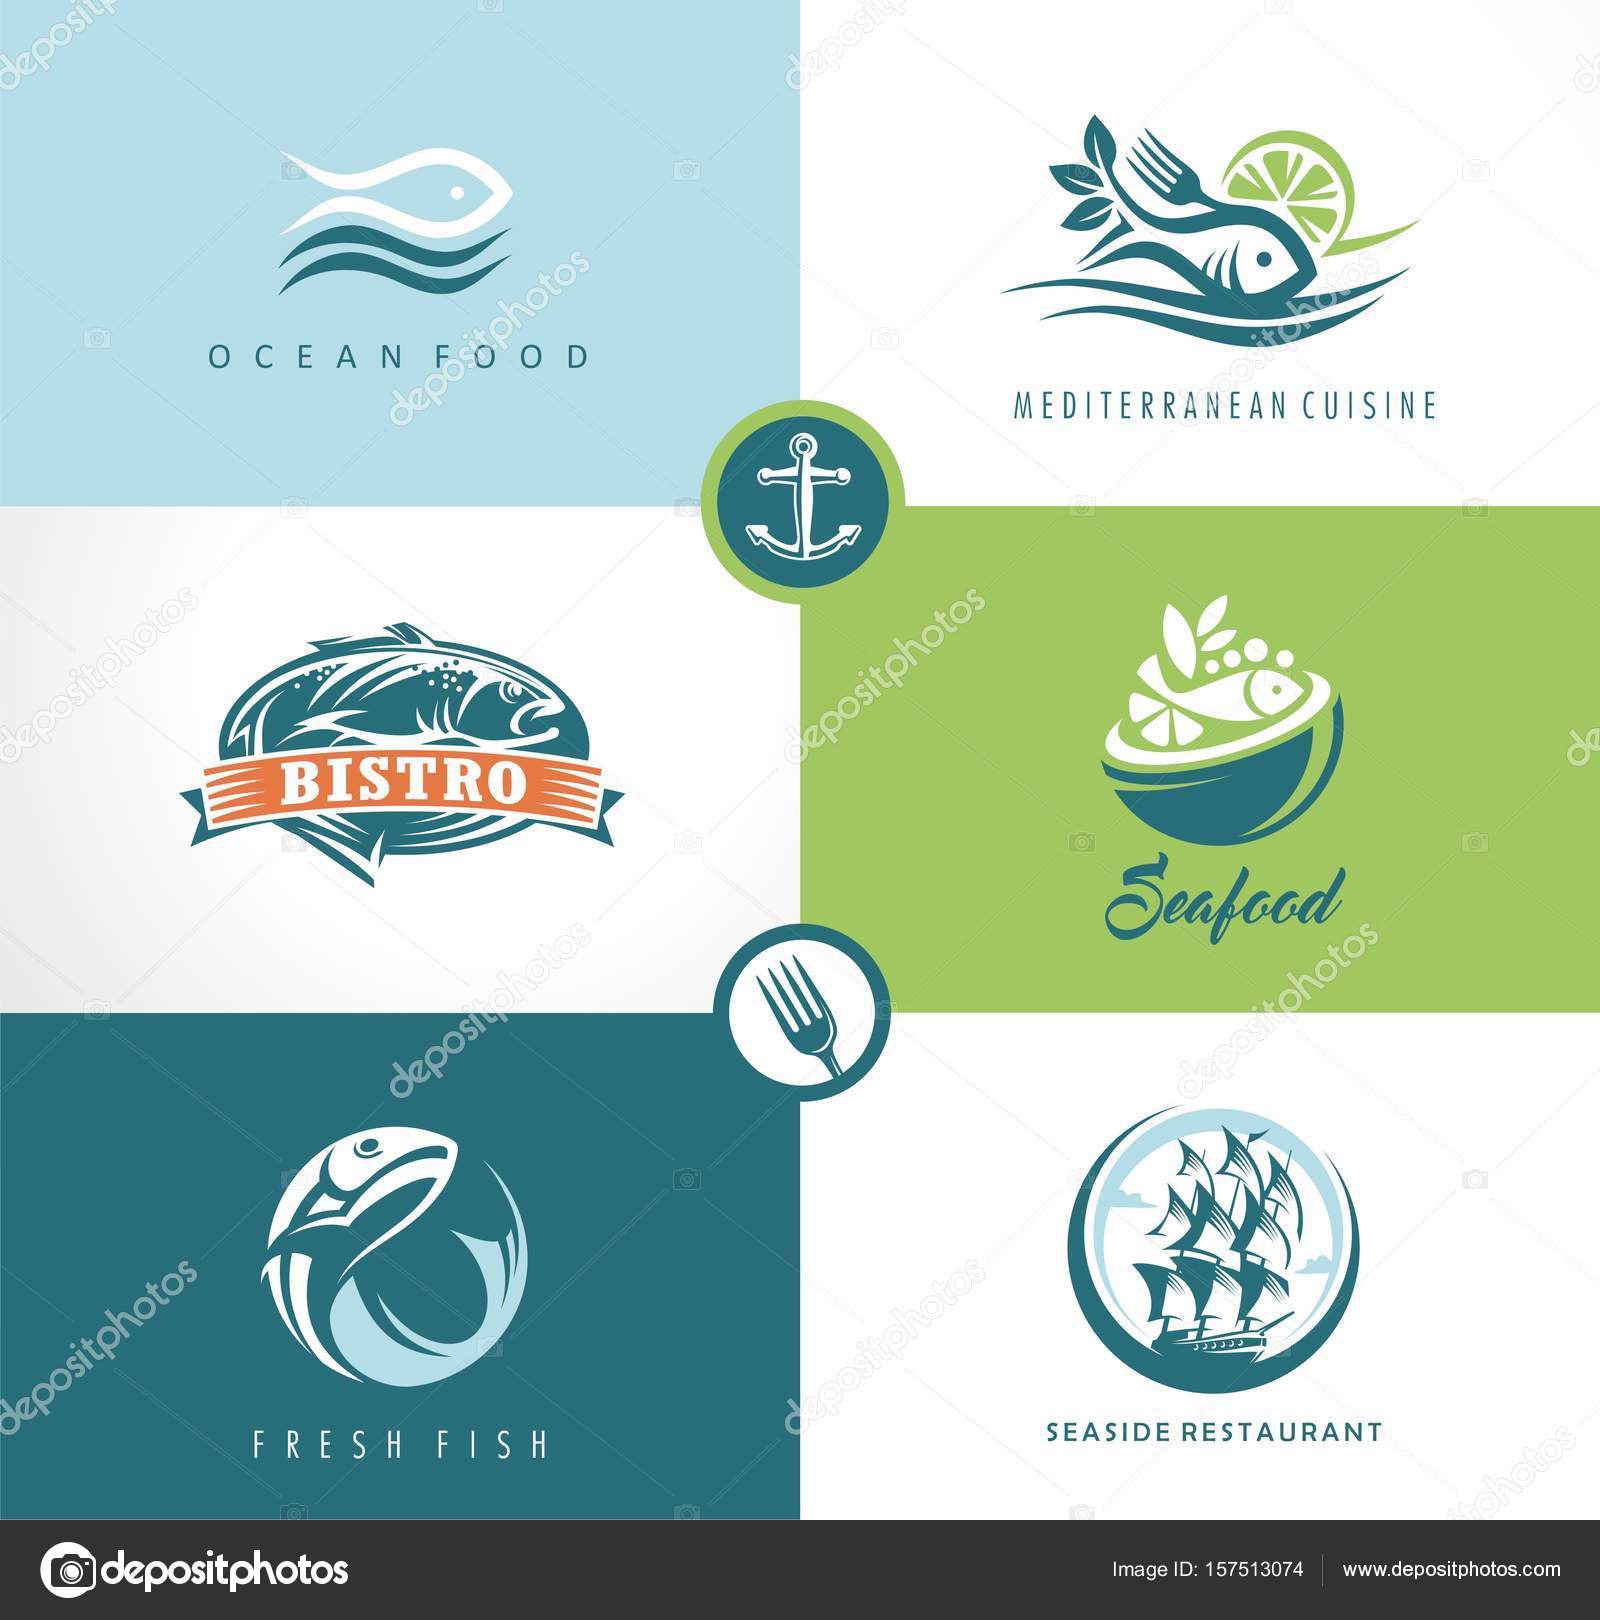 Seafood Restaurant Signs Seafood Restaurant Symbols Icons Signs